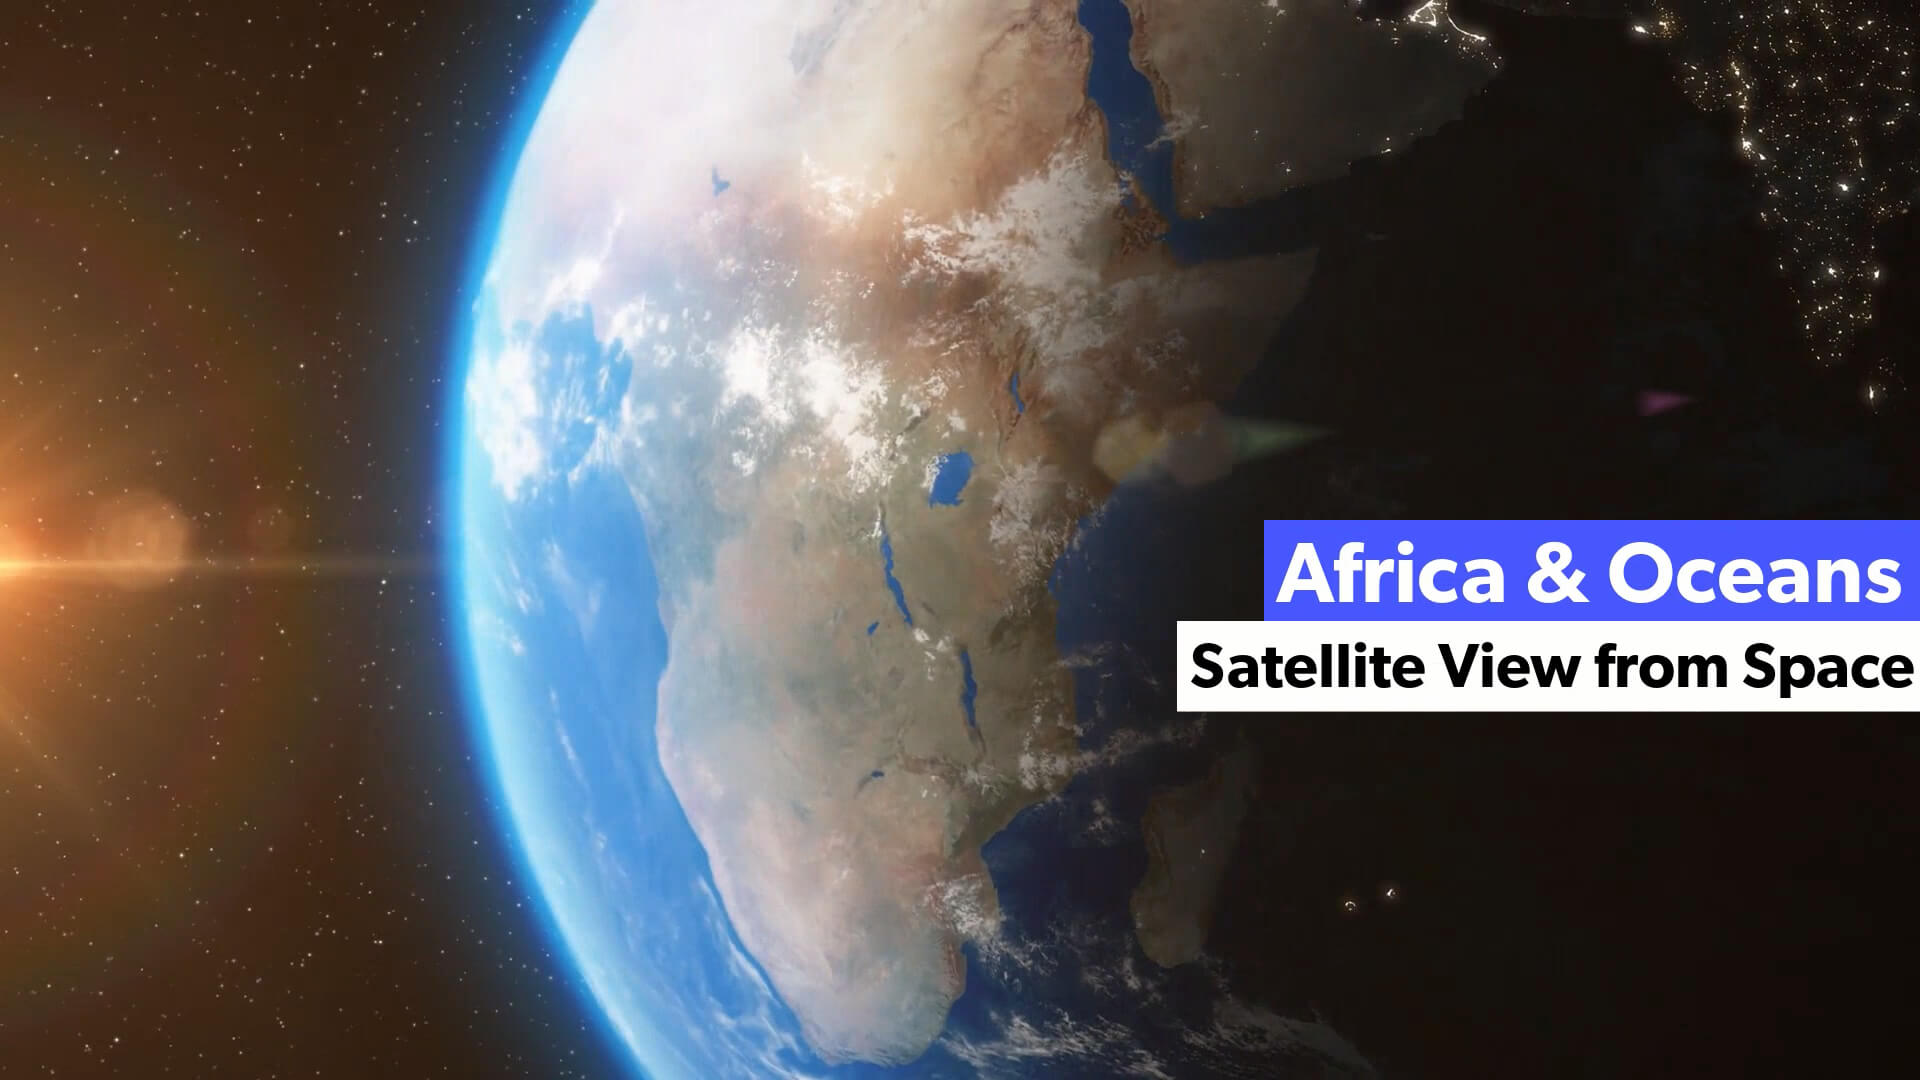 Africa and Oceans Satellite View from Space